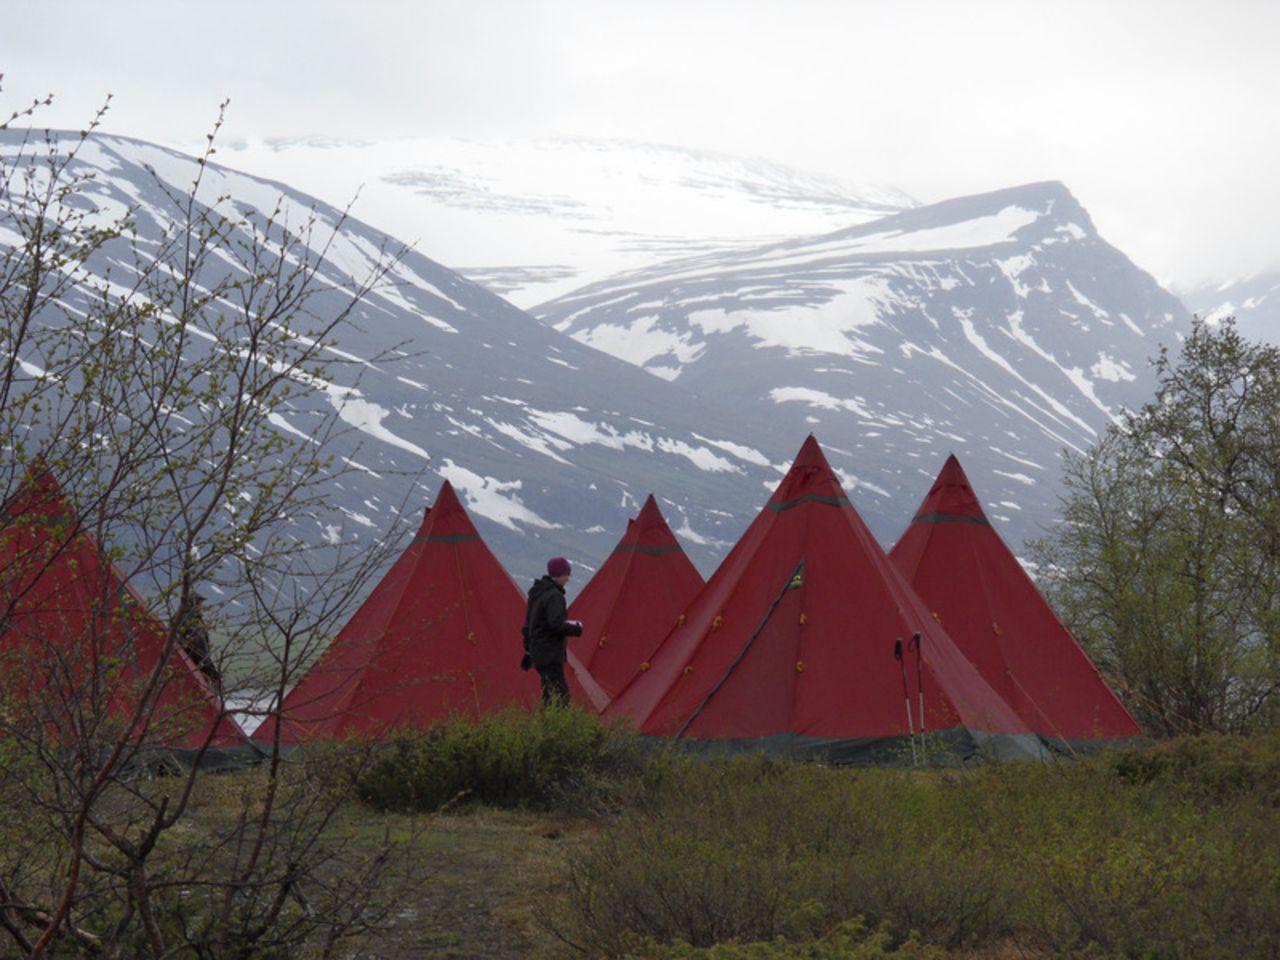 A group of determined trekkers set up camp at the foot of Kebnekaise, Sweden's highest mountain. It's just one of the stops along the mammoth "King's Trail" that stretches for 440 kilometers.